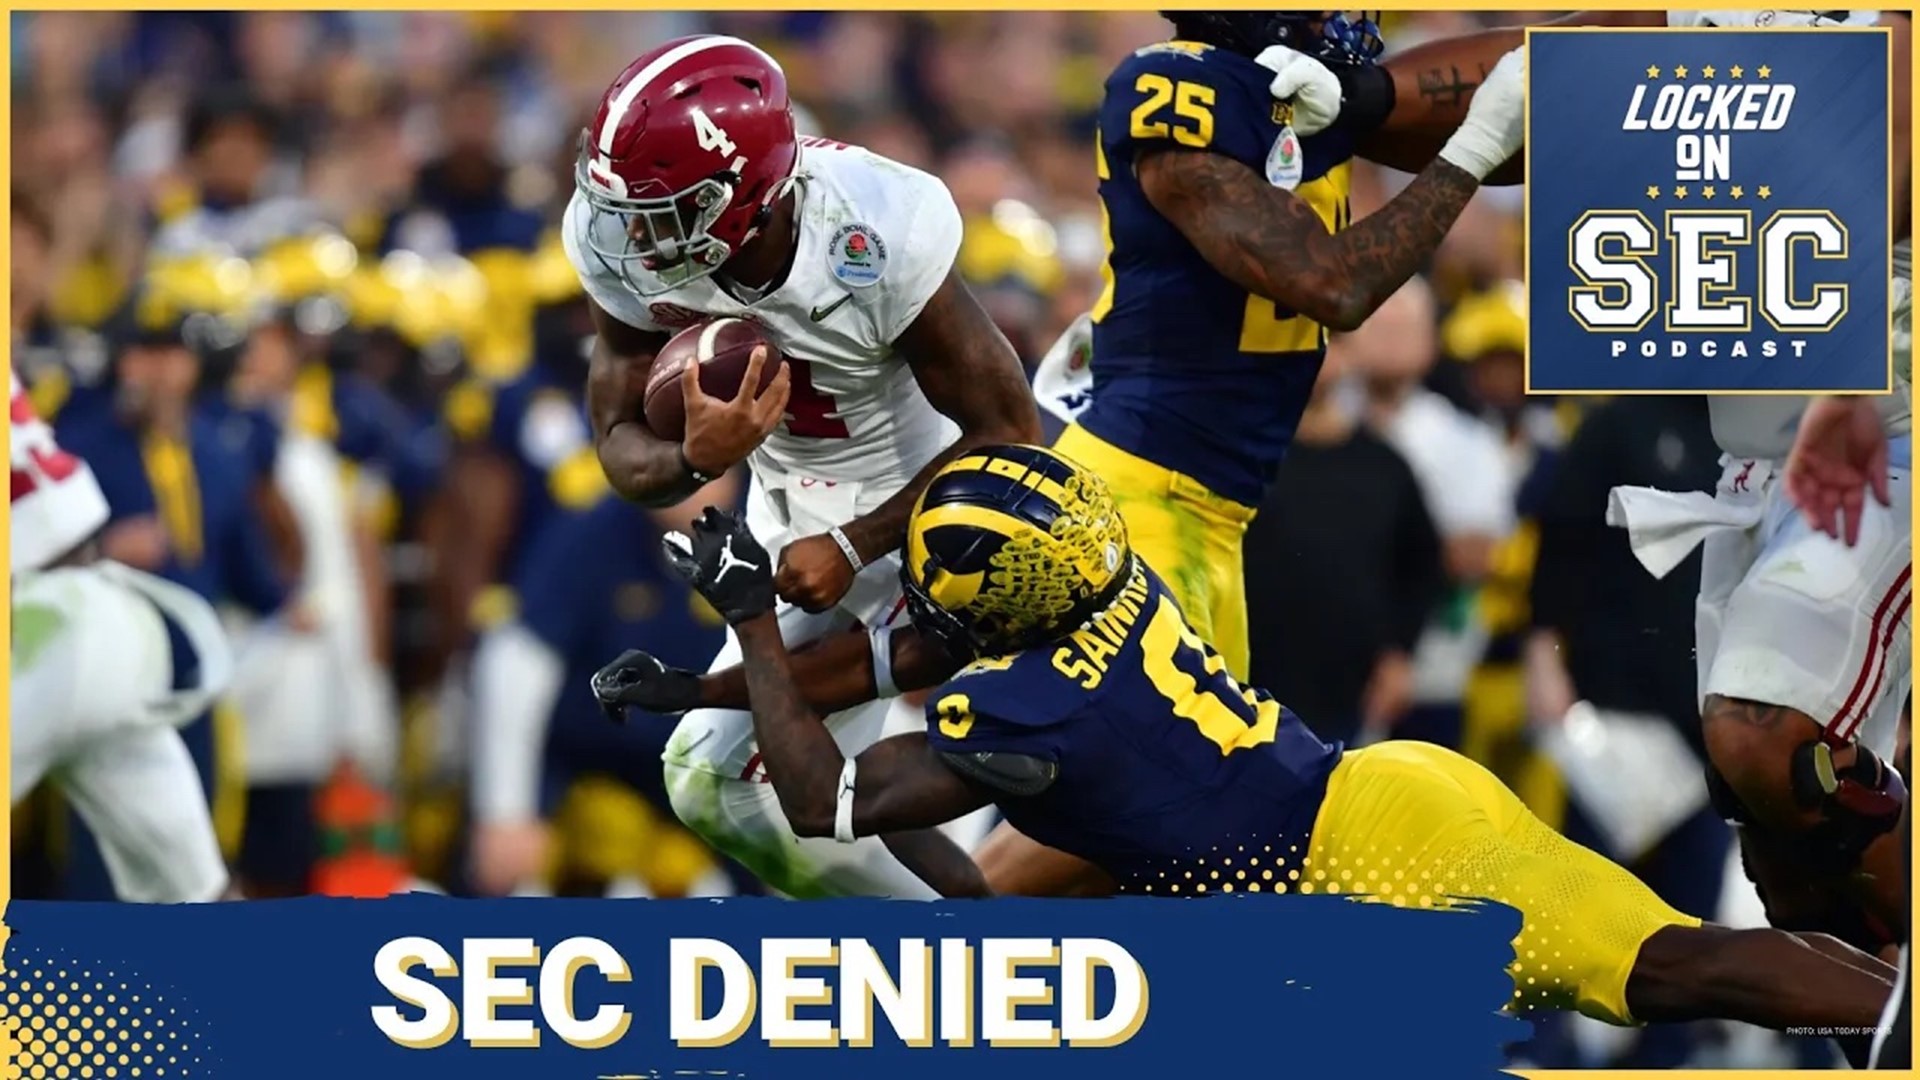 For the first time since 2014, the SEC will not play for a National Championship in college football. What was that play that Tommy Rees called for Jalen Milroe?